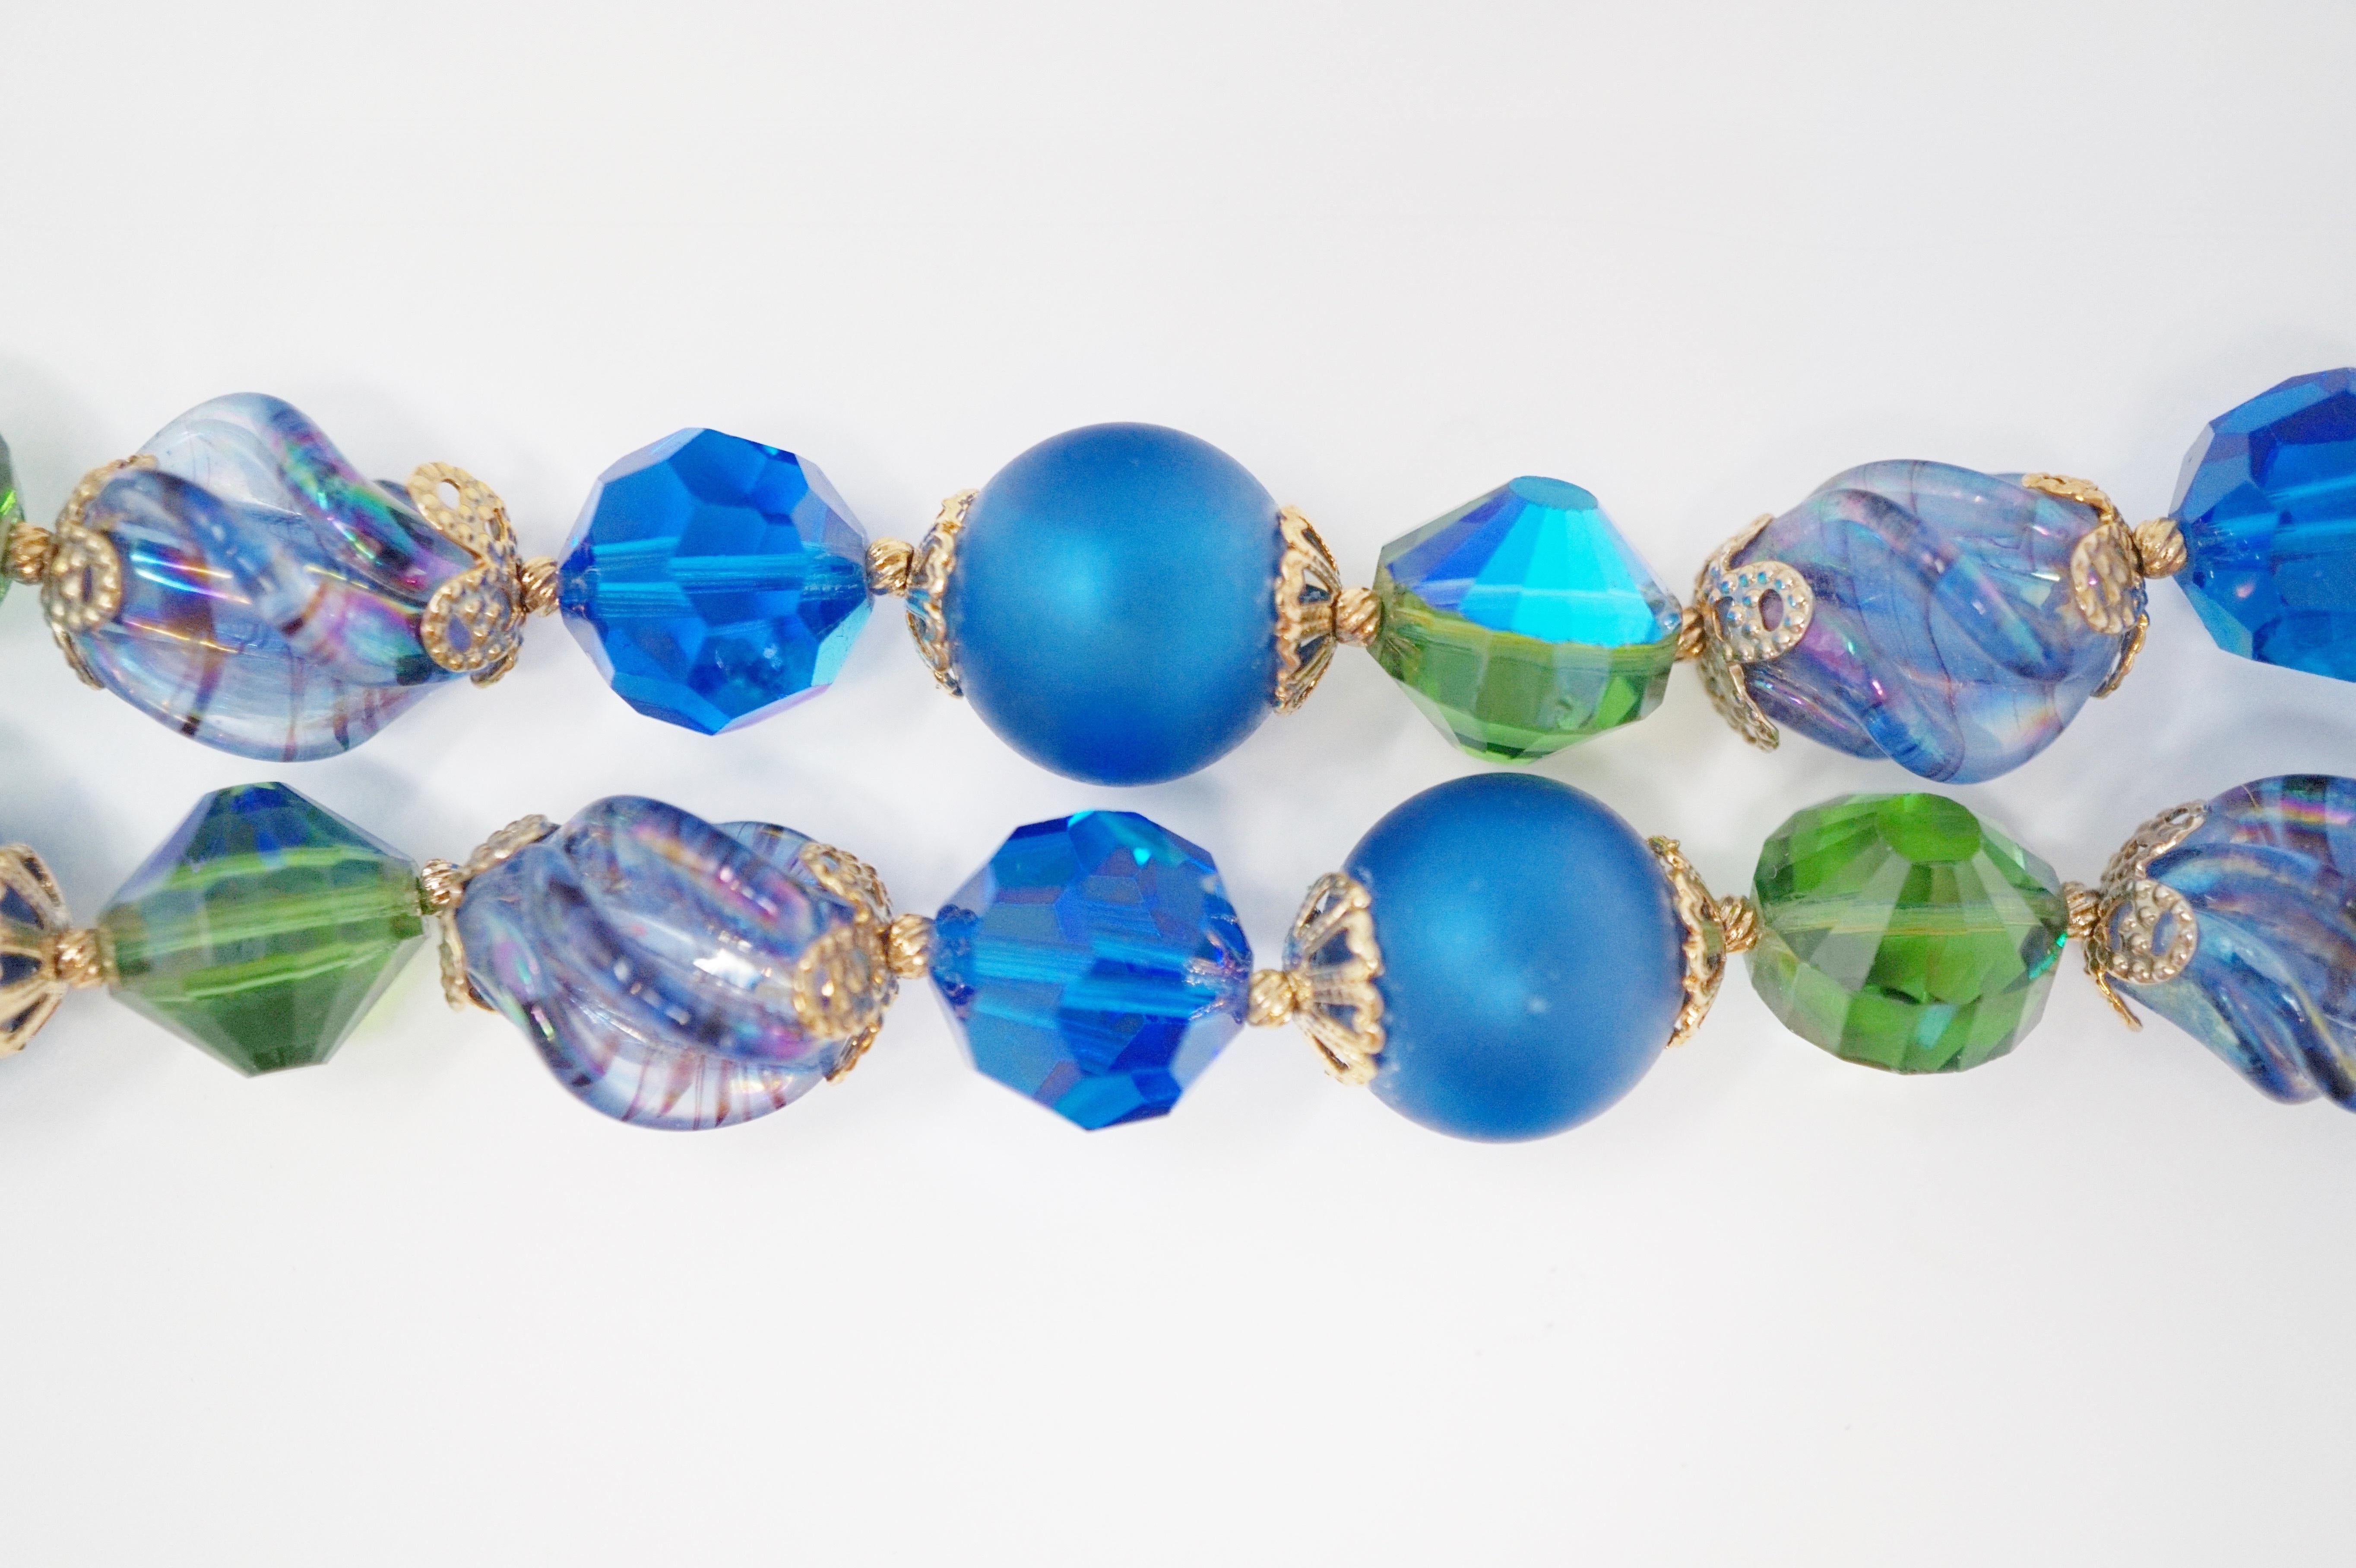 Modernist Vendome Beaded Bracelet with Aurora Borealis Crystals, circa 1950, Signed For Sale